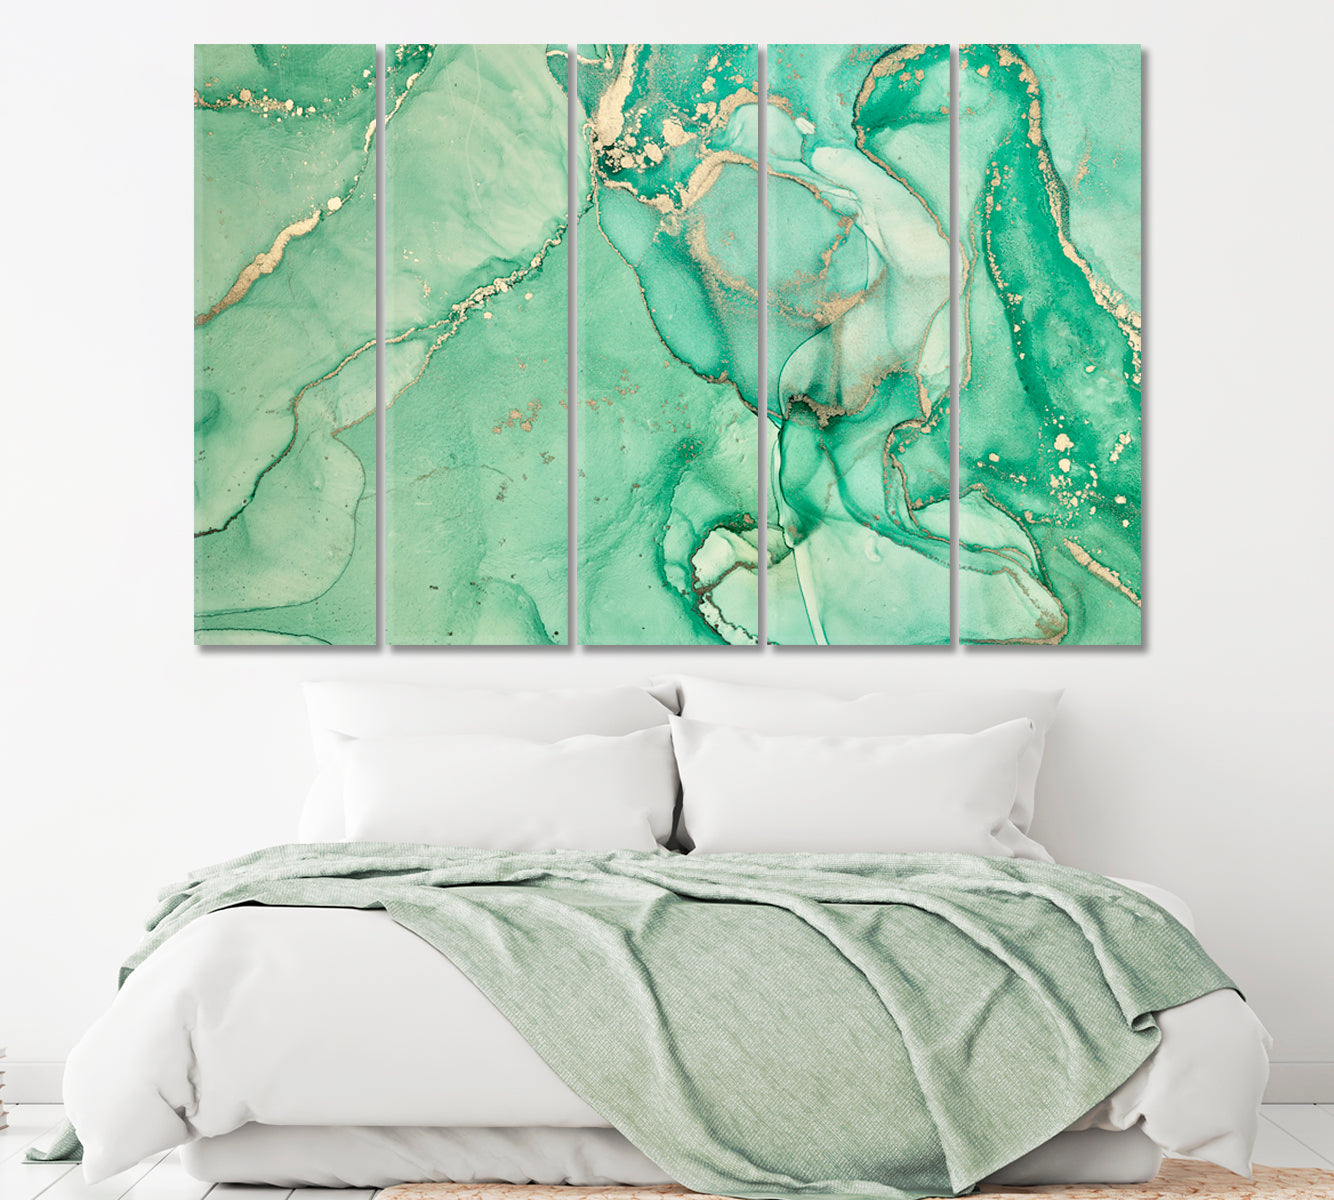 Modern Green Abstract Composition Canvas Print ArtLexy 5 Panels 36"x24" inches 